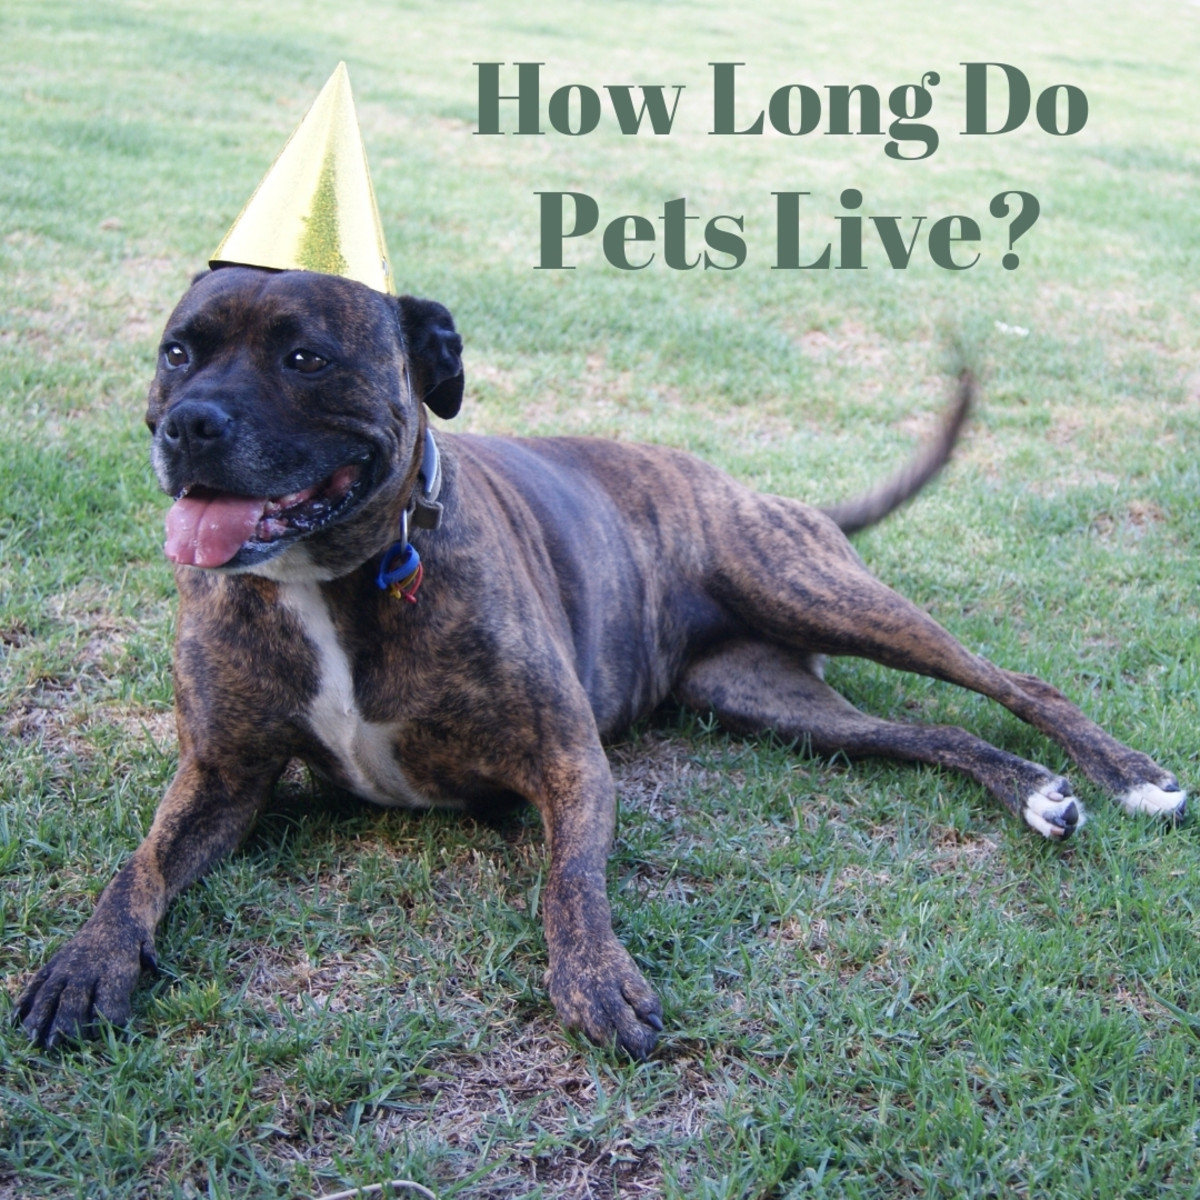 How long do dogs and cats live? What about fish?